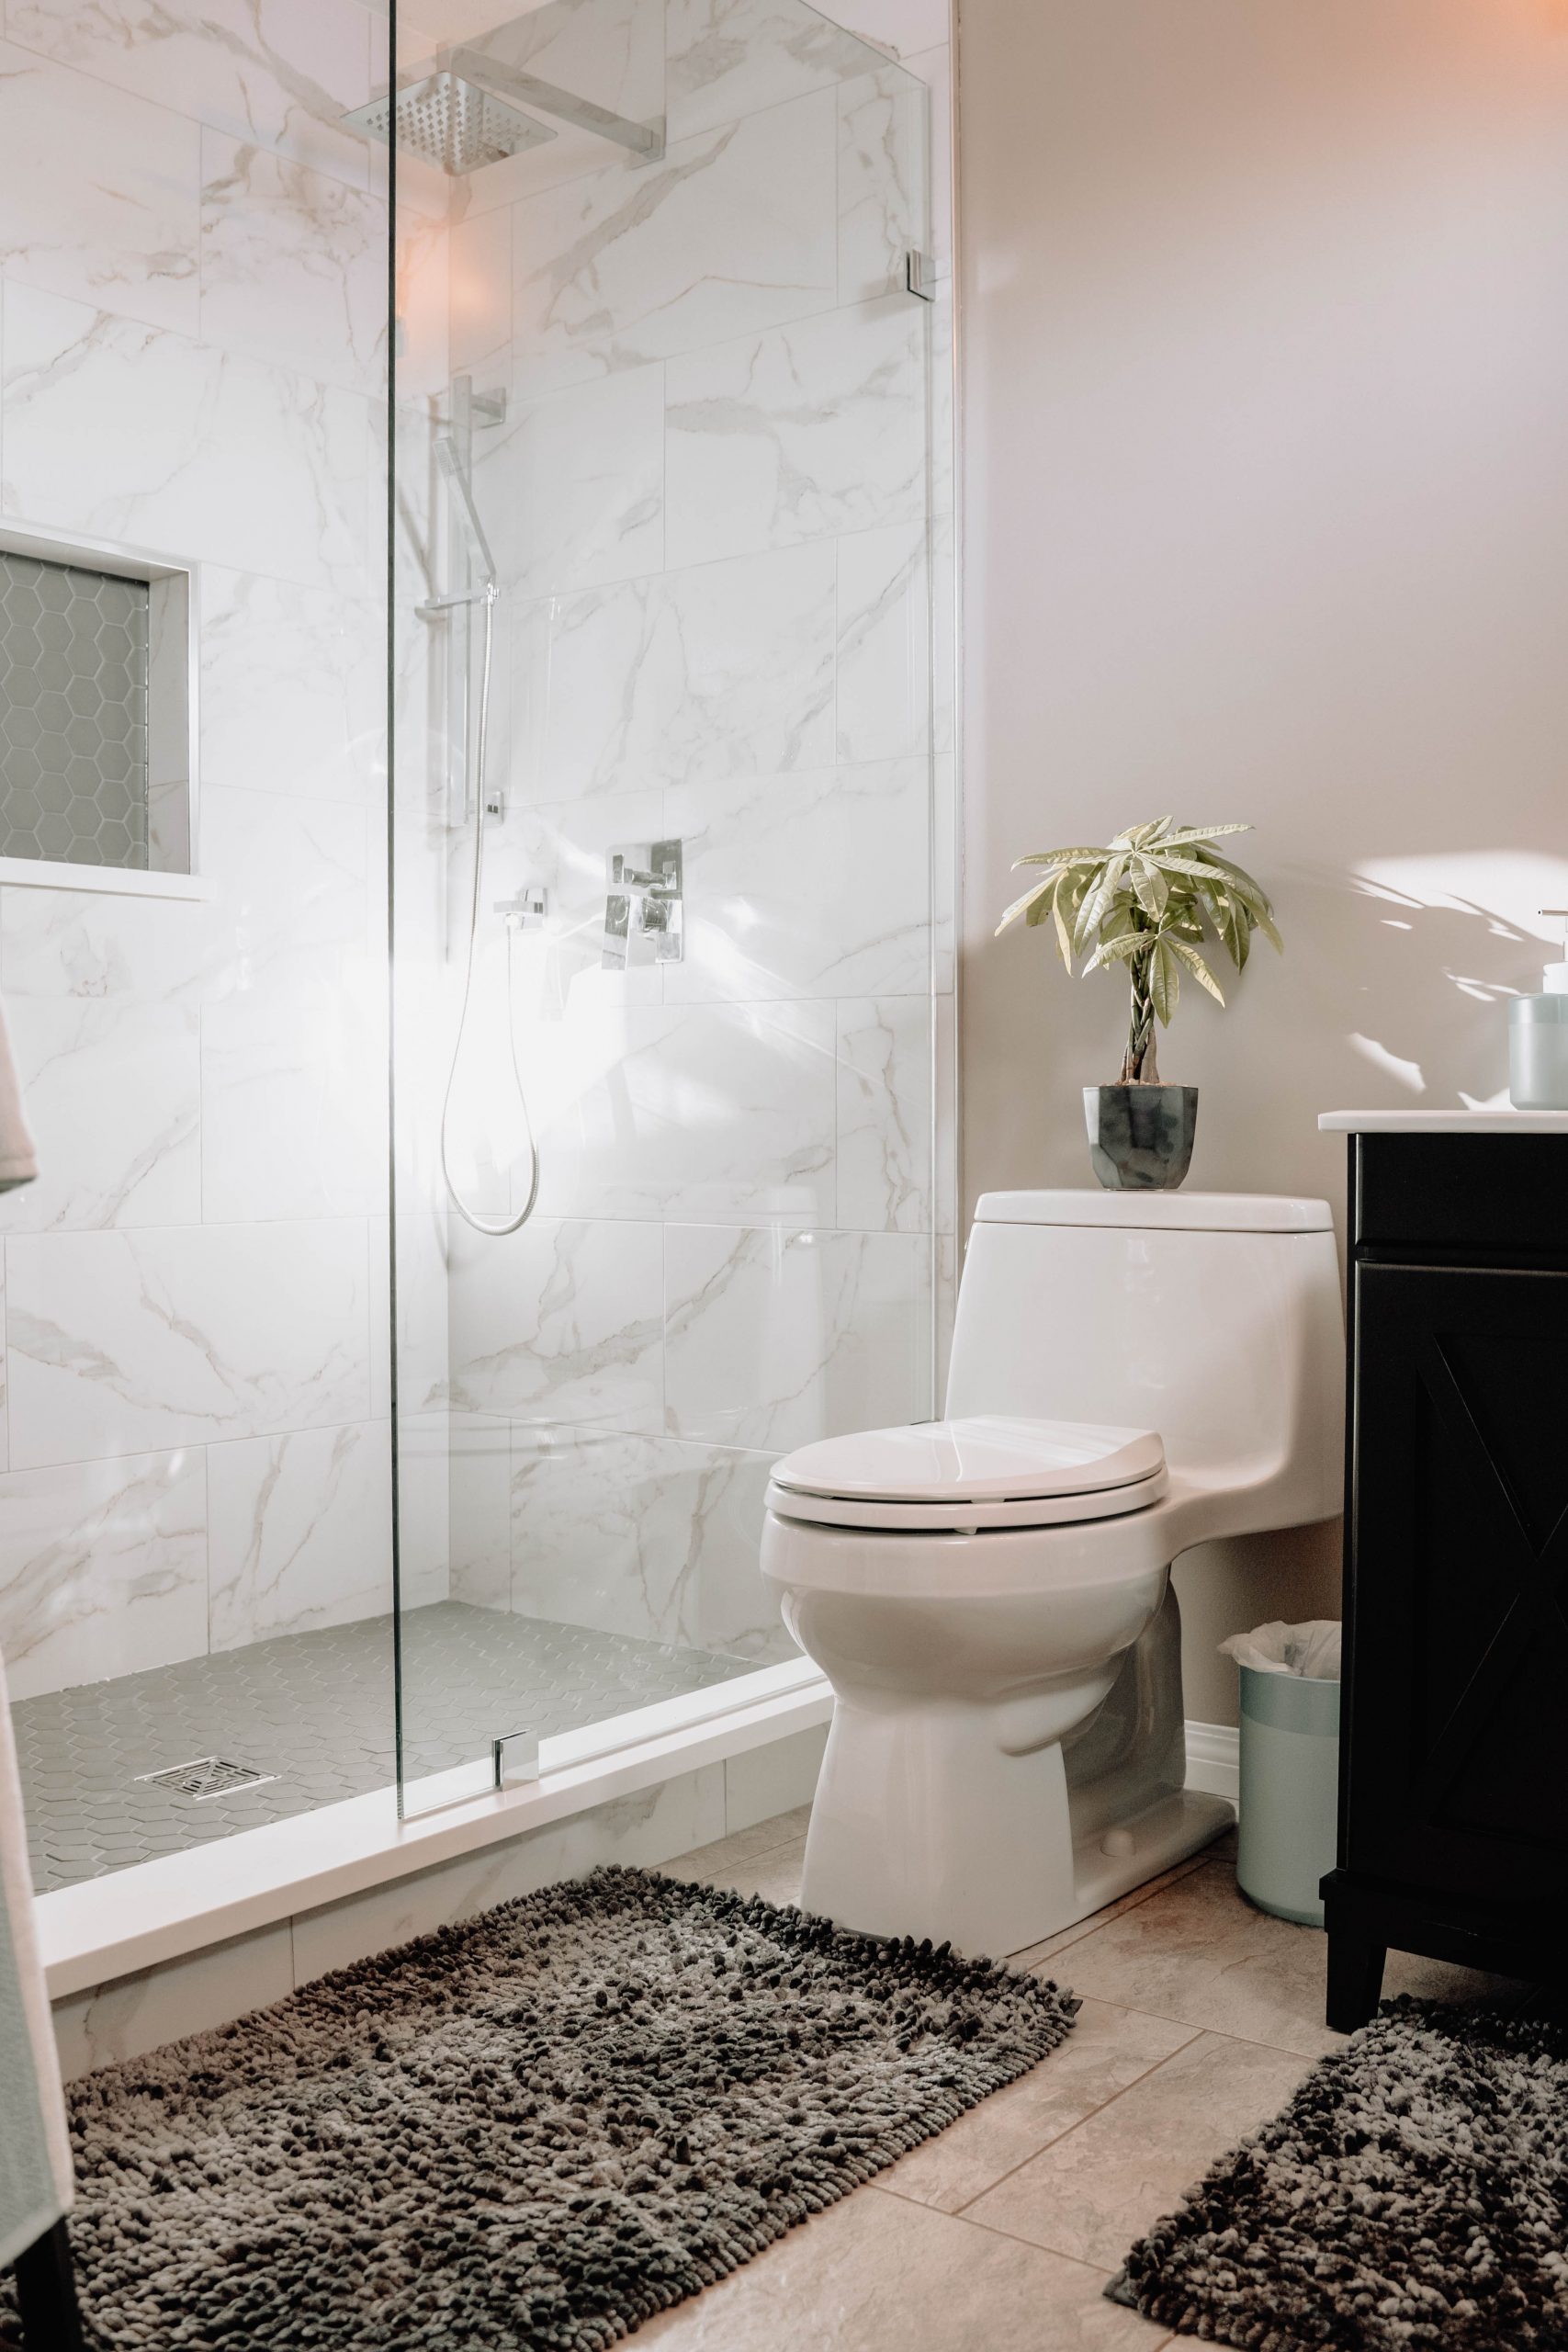 We all use toilets on a daily basis, but have you noticed that there are various types of toilet seats? They usually differ by the shape, material, color, and features that they provide. Let’s check out all types of toilet seats that you can find in the market.